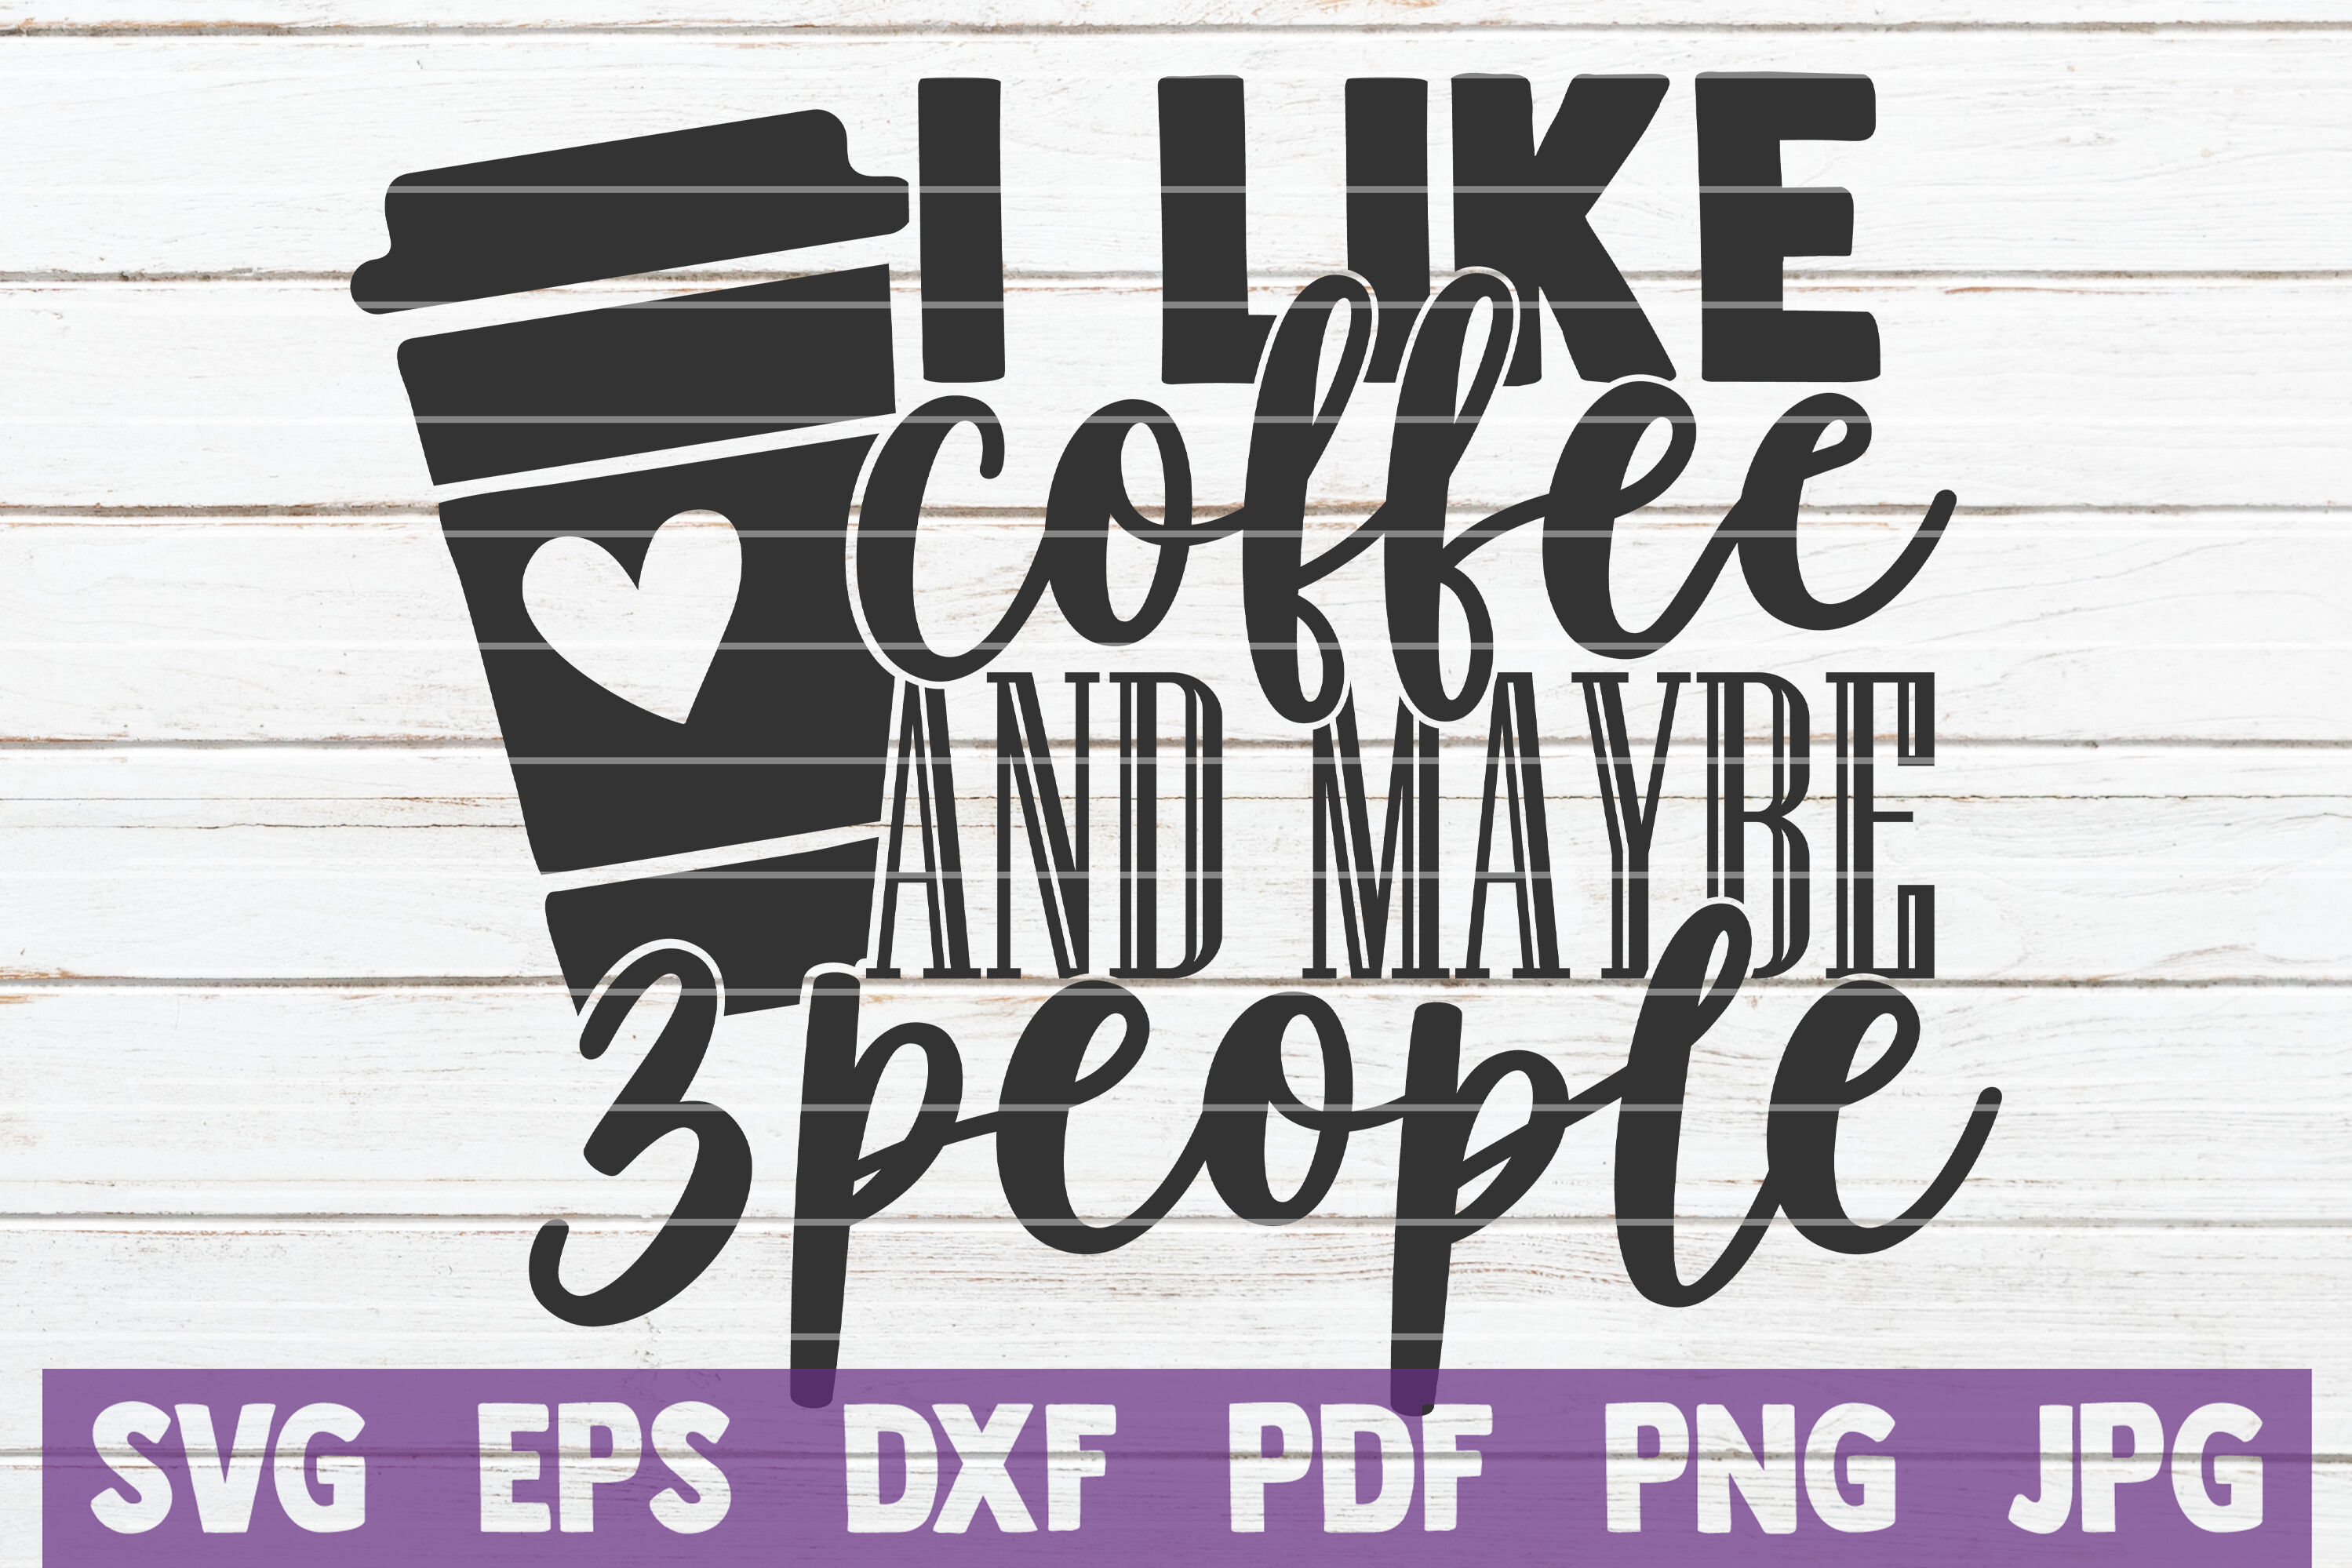 Download I Like Coffee And Maybe 3 People Svg Cut File By Mintymarshmallows Thehungryjpeg Com